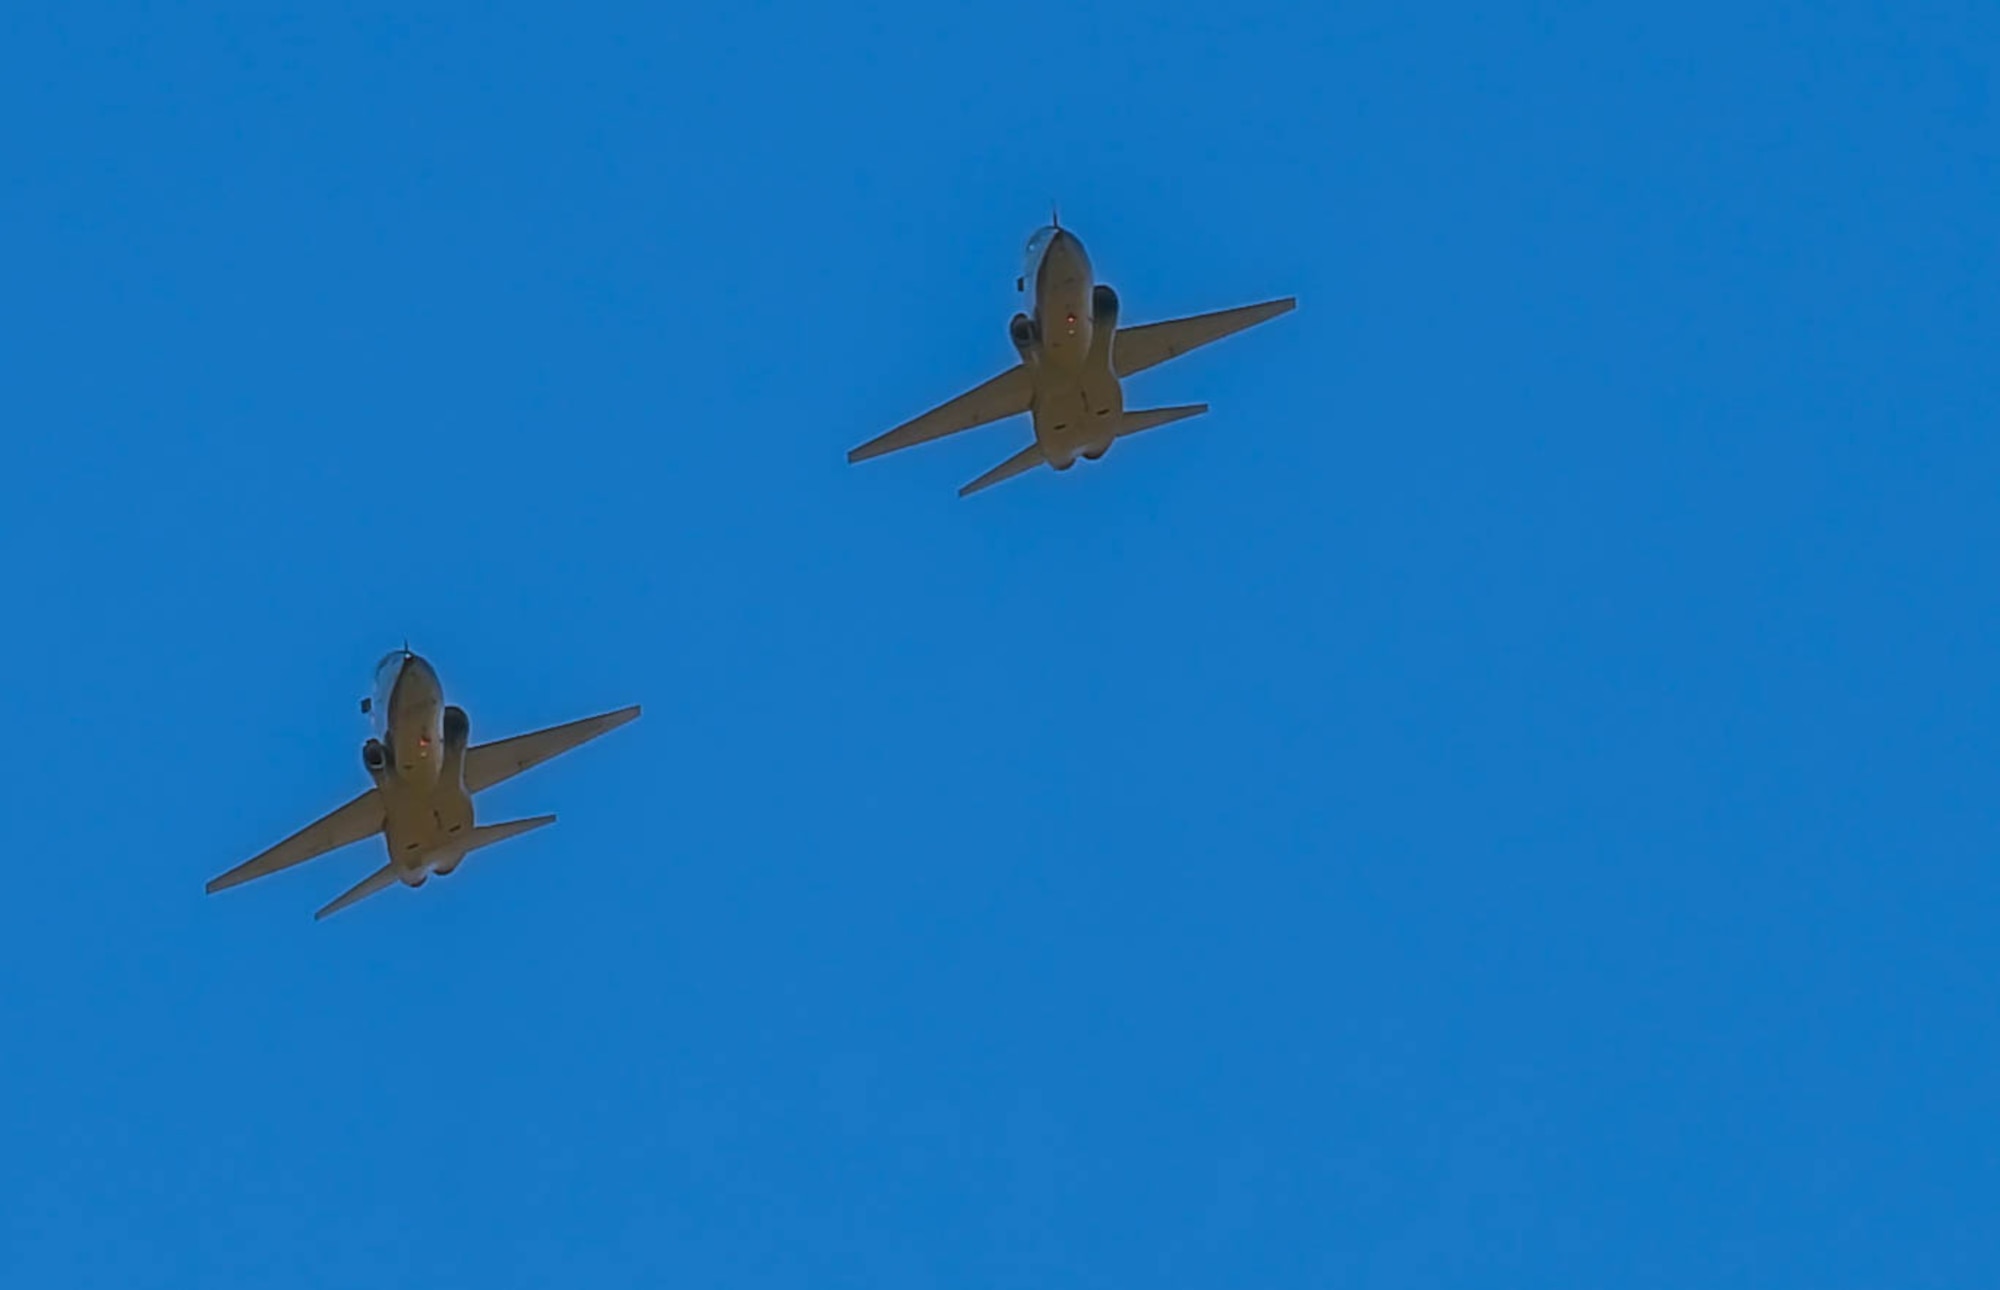 Two T-38 Talons from the 416th Flight Test Squadron, 412th Test Wing, Edwards Air Force Base, California perform a flyover in honor of retired U.S. Air Force Col. Robert F. Waggoner, during a memorial service at Bishop, California, Sept. 12. (Air Force photo by Danny Bazzell)